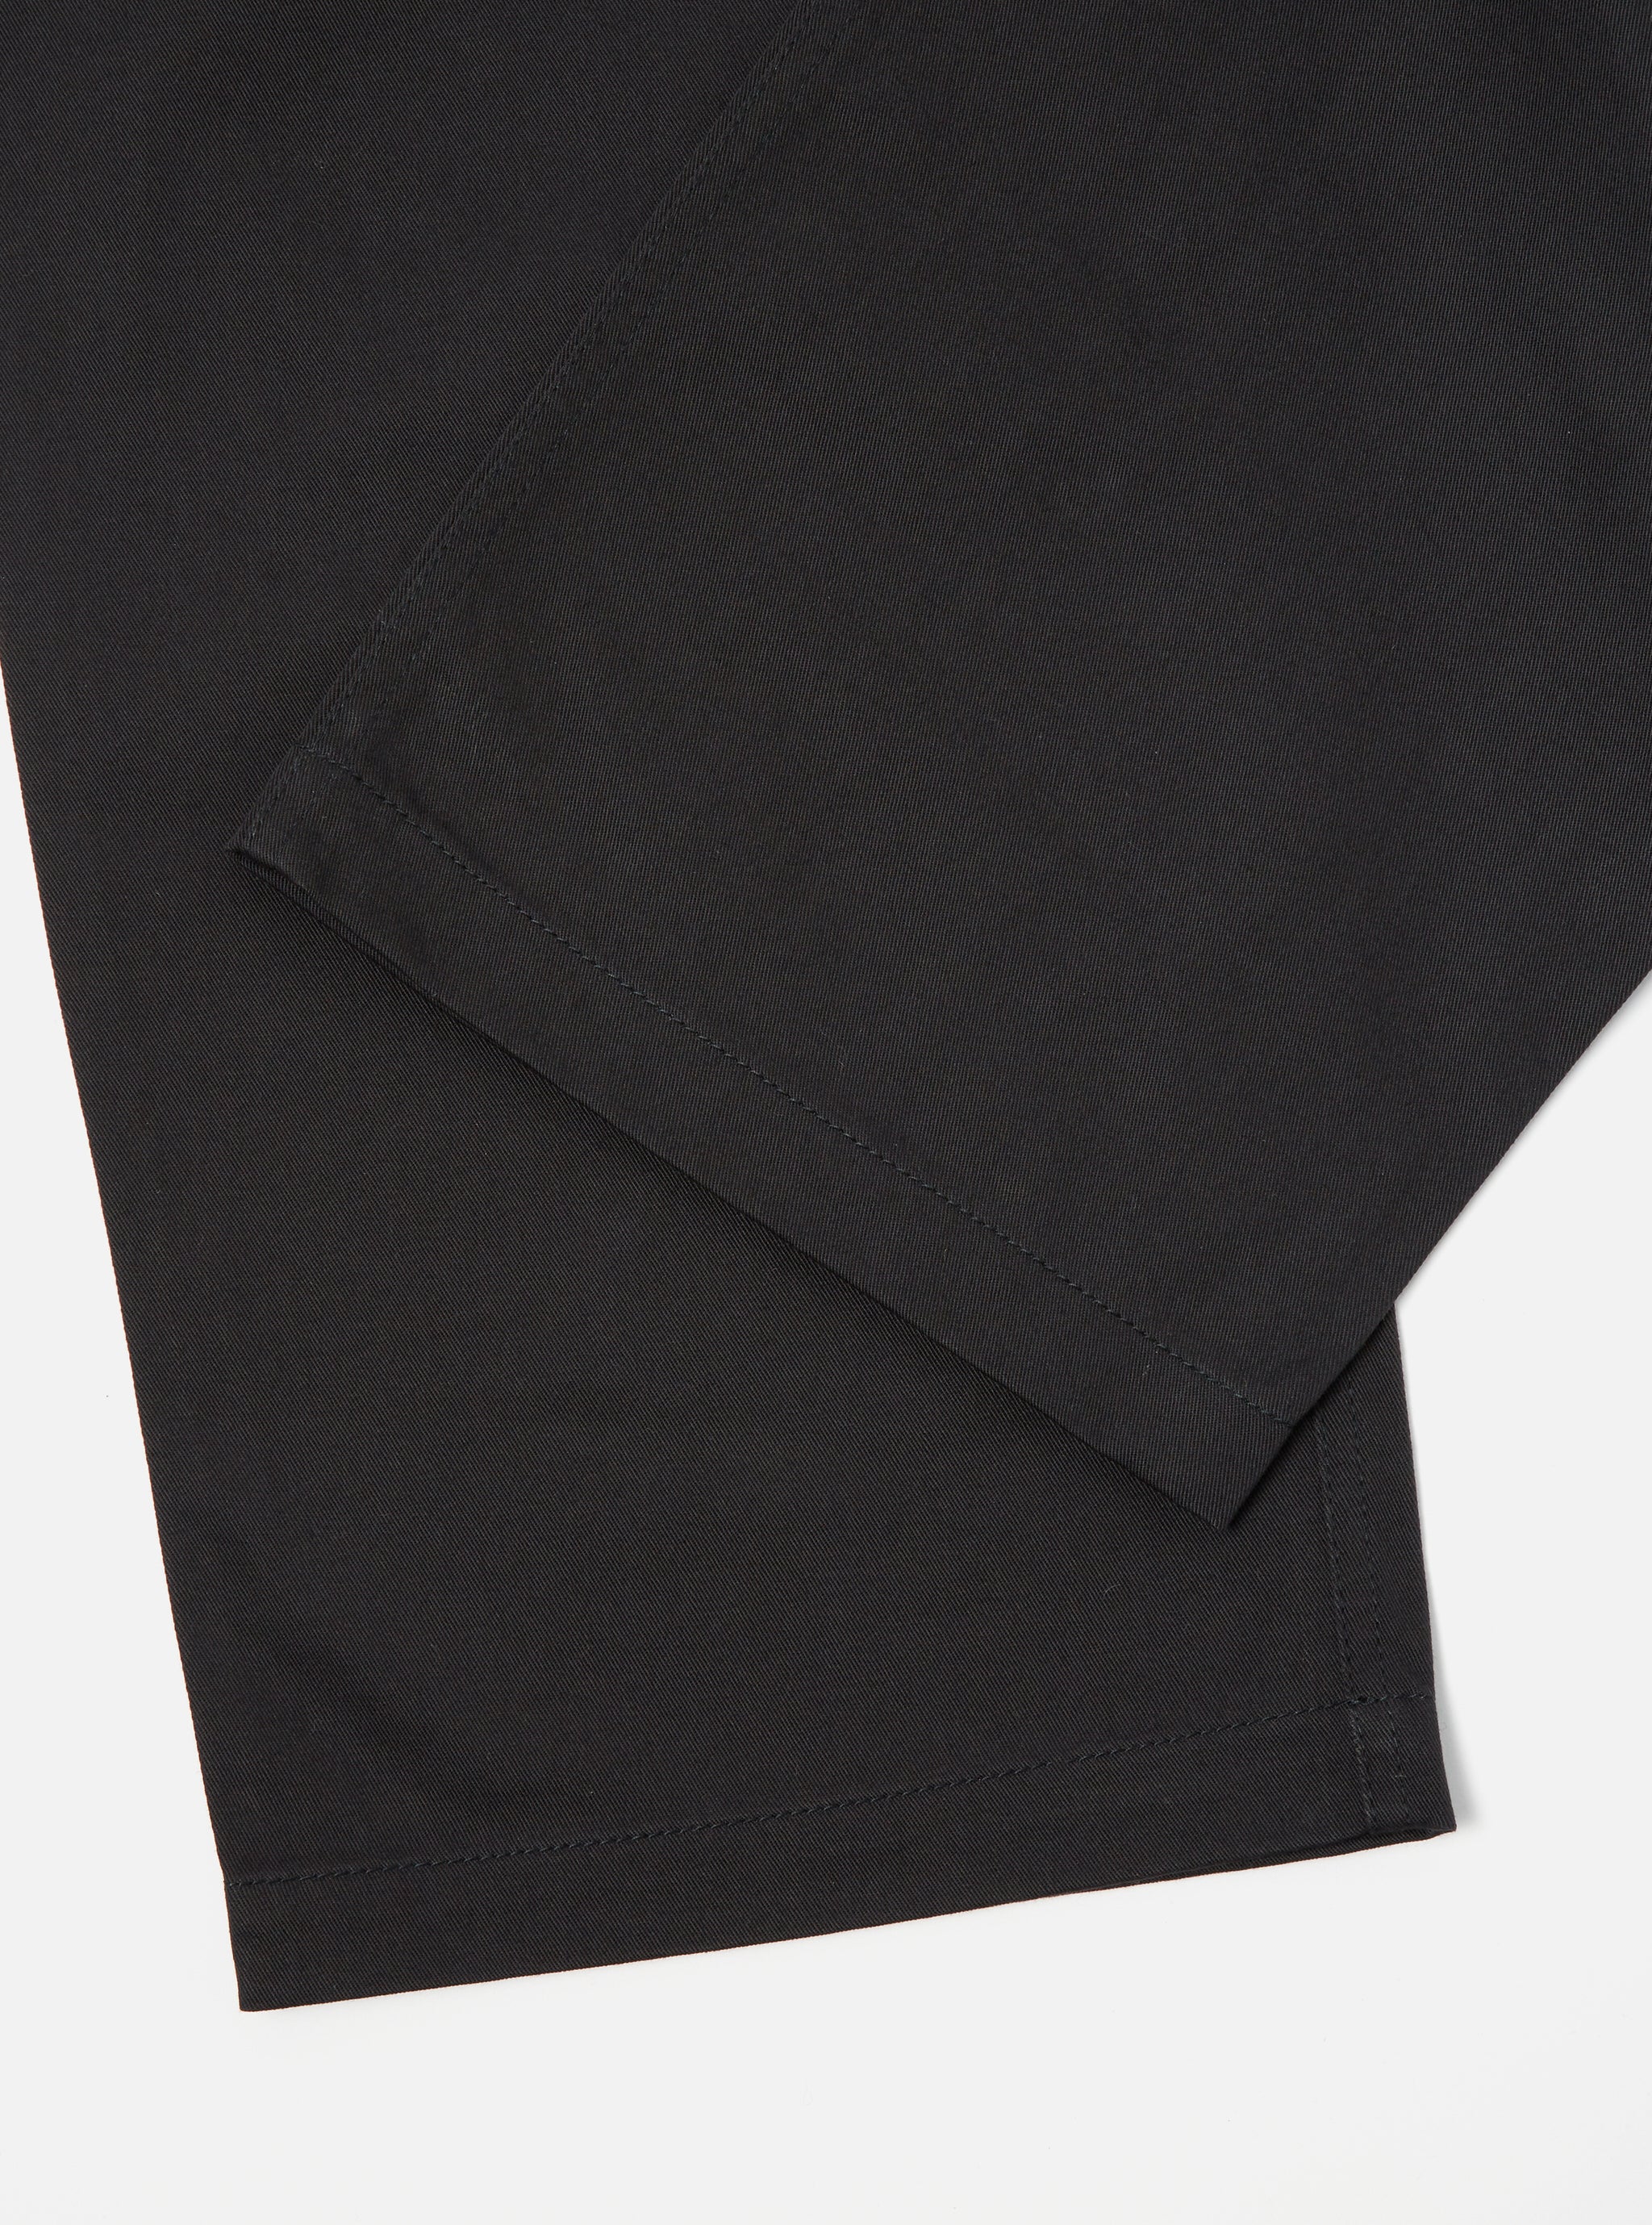 Universal Works Fatigue Pant in Black Twill